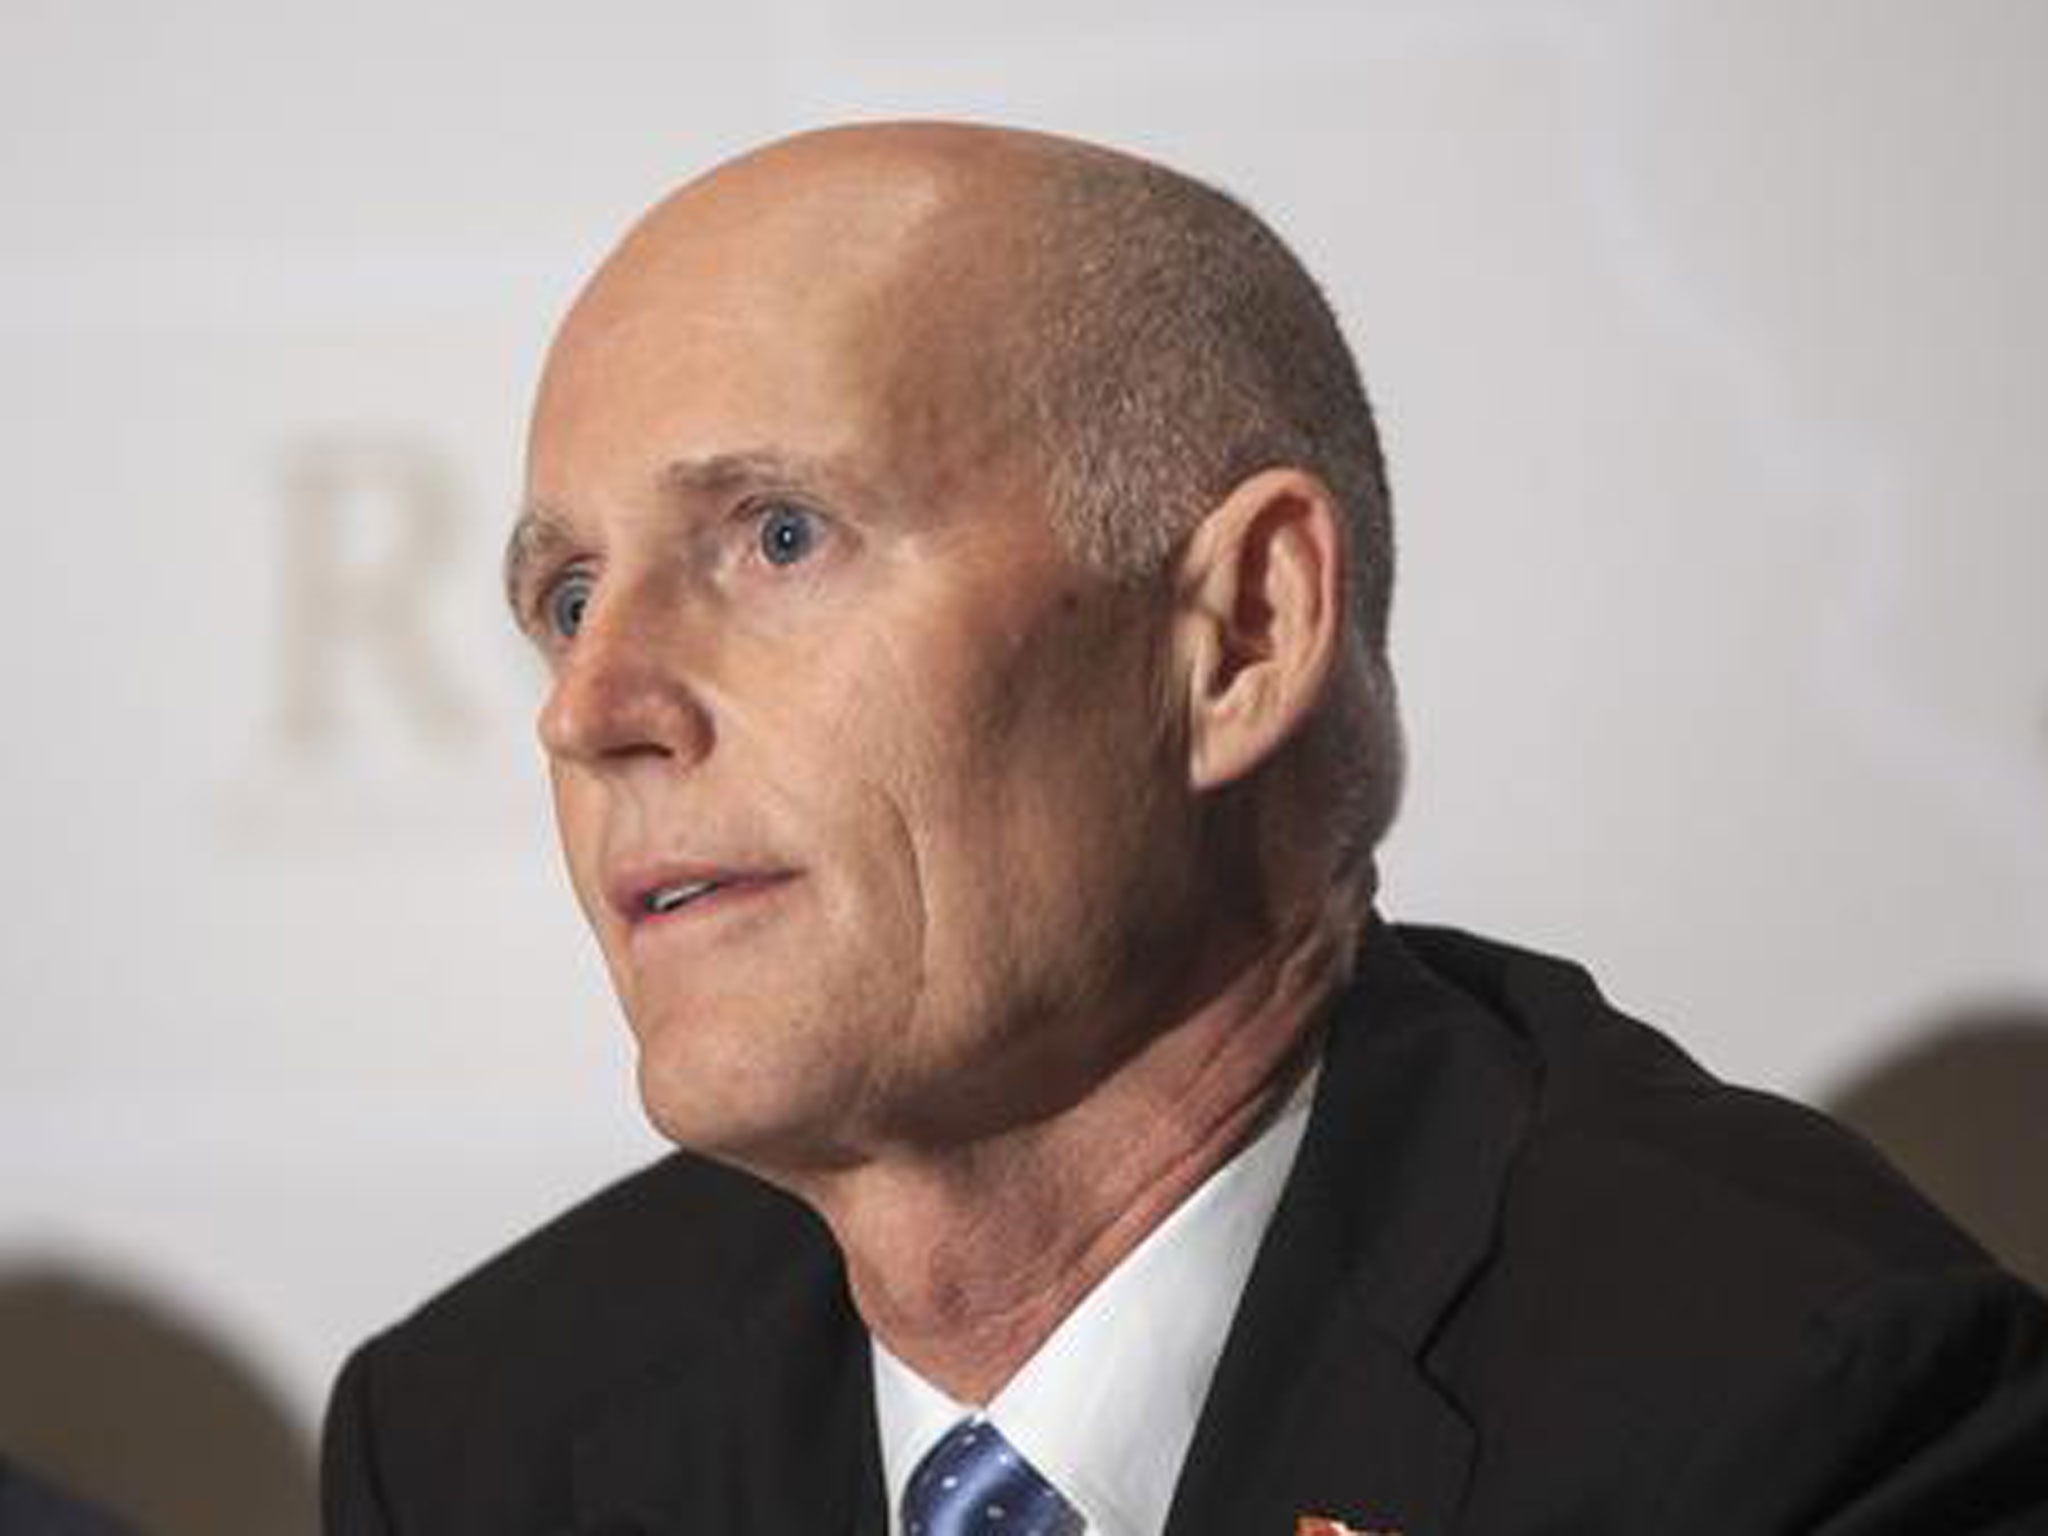 Florida’s incumbent governor, Rick Scott, won in 2010 by a narrow margin